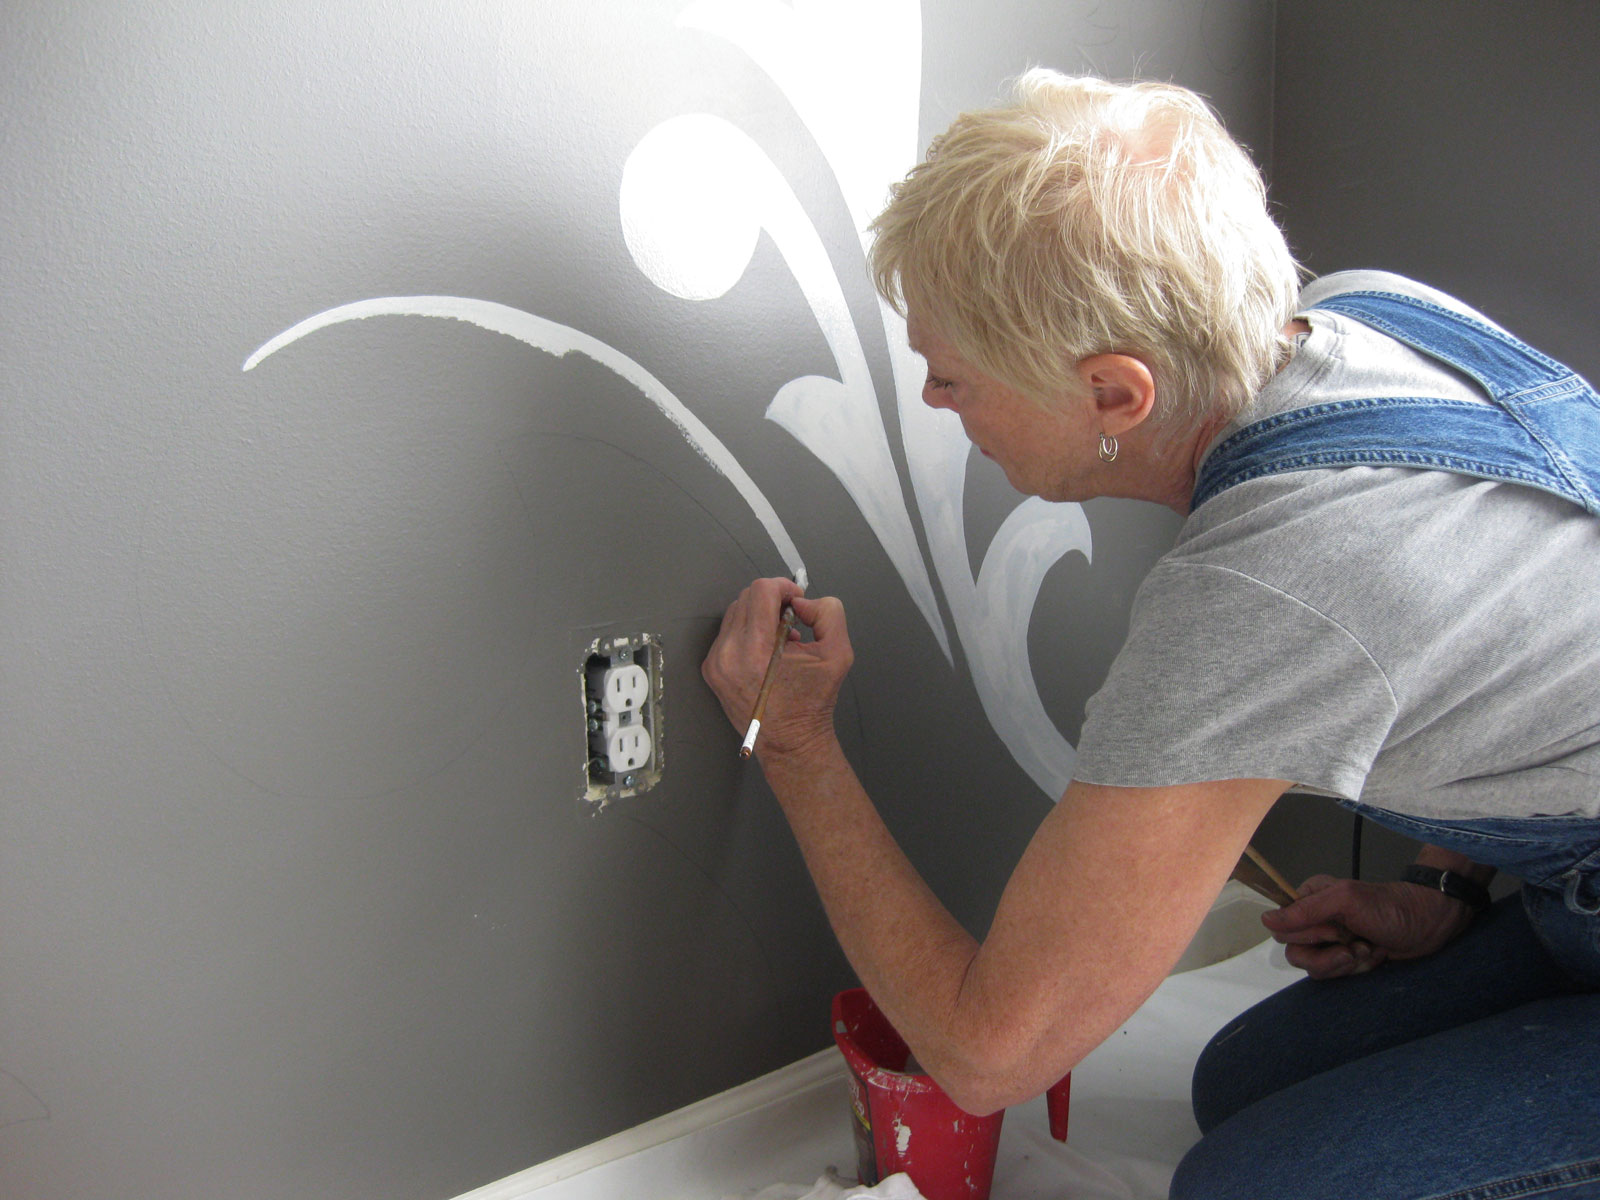 Woman using brush to paint mural by electric outlet